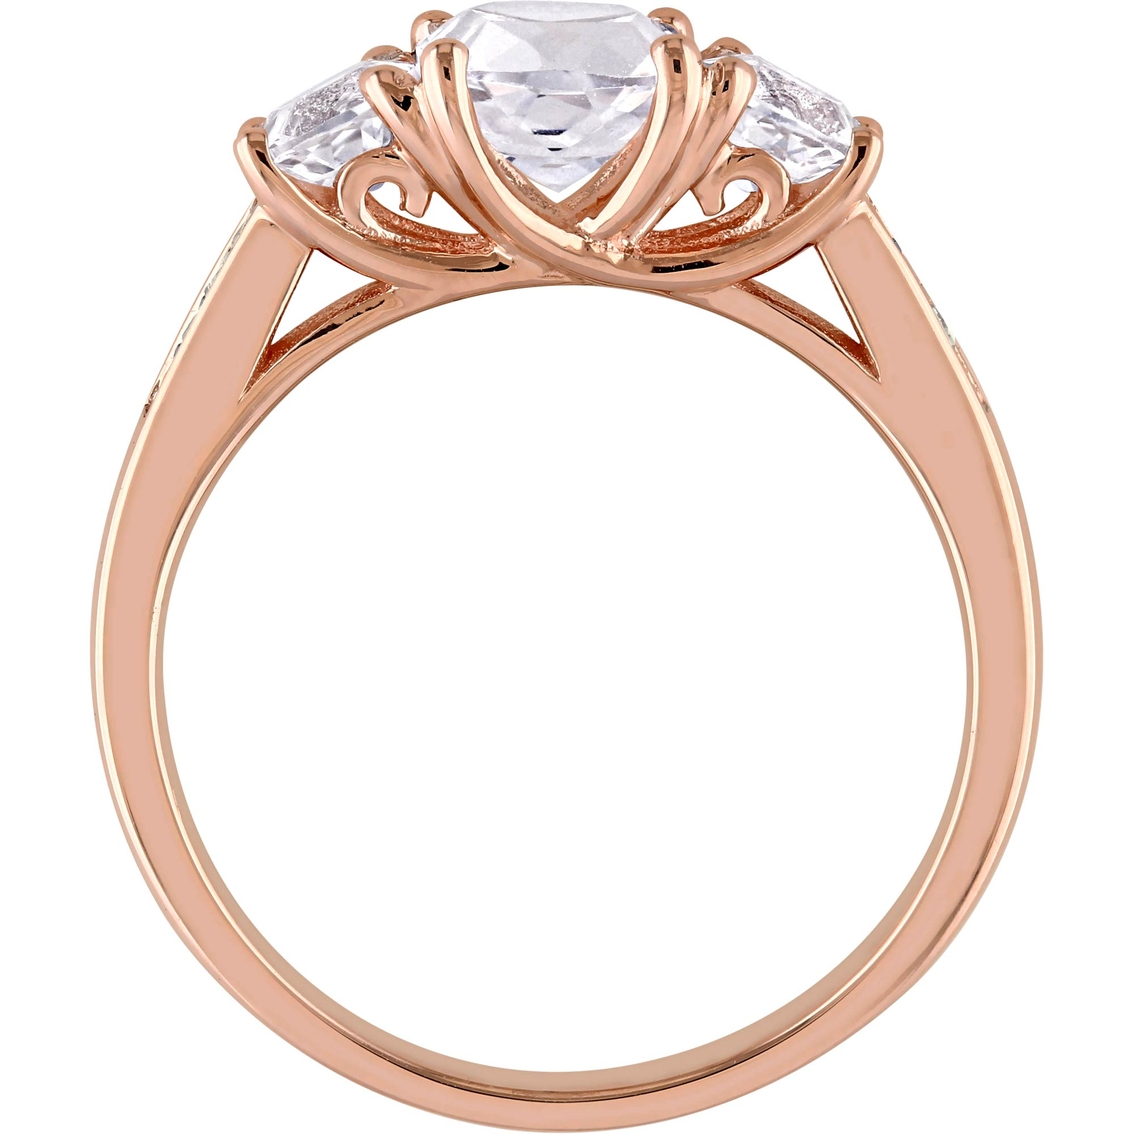 Sofia B. 10K Rose Gold 2 CTW Created White Sapphire and 3-Stone Engagement Ring - Image 3 of 4